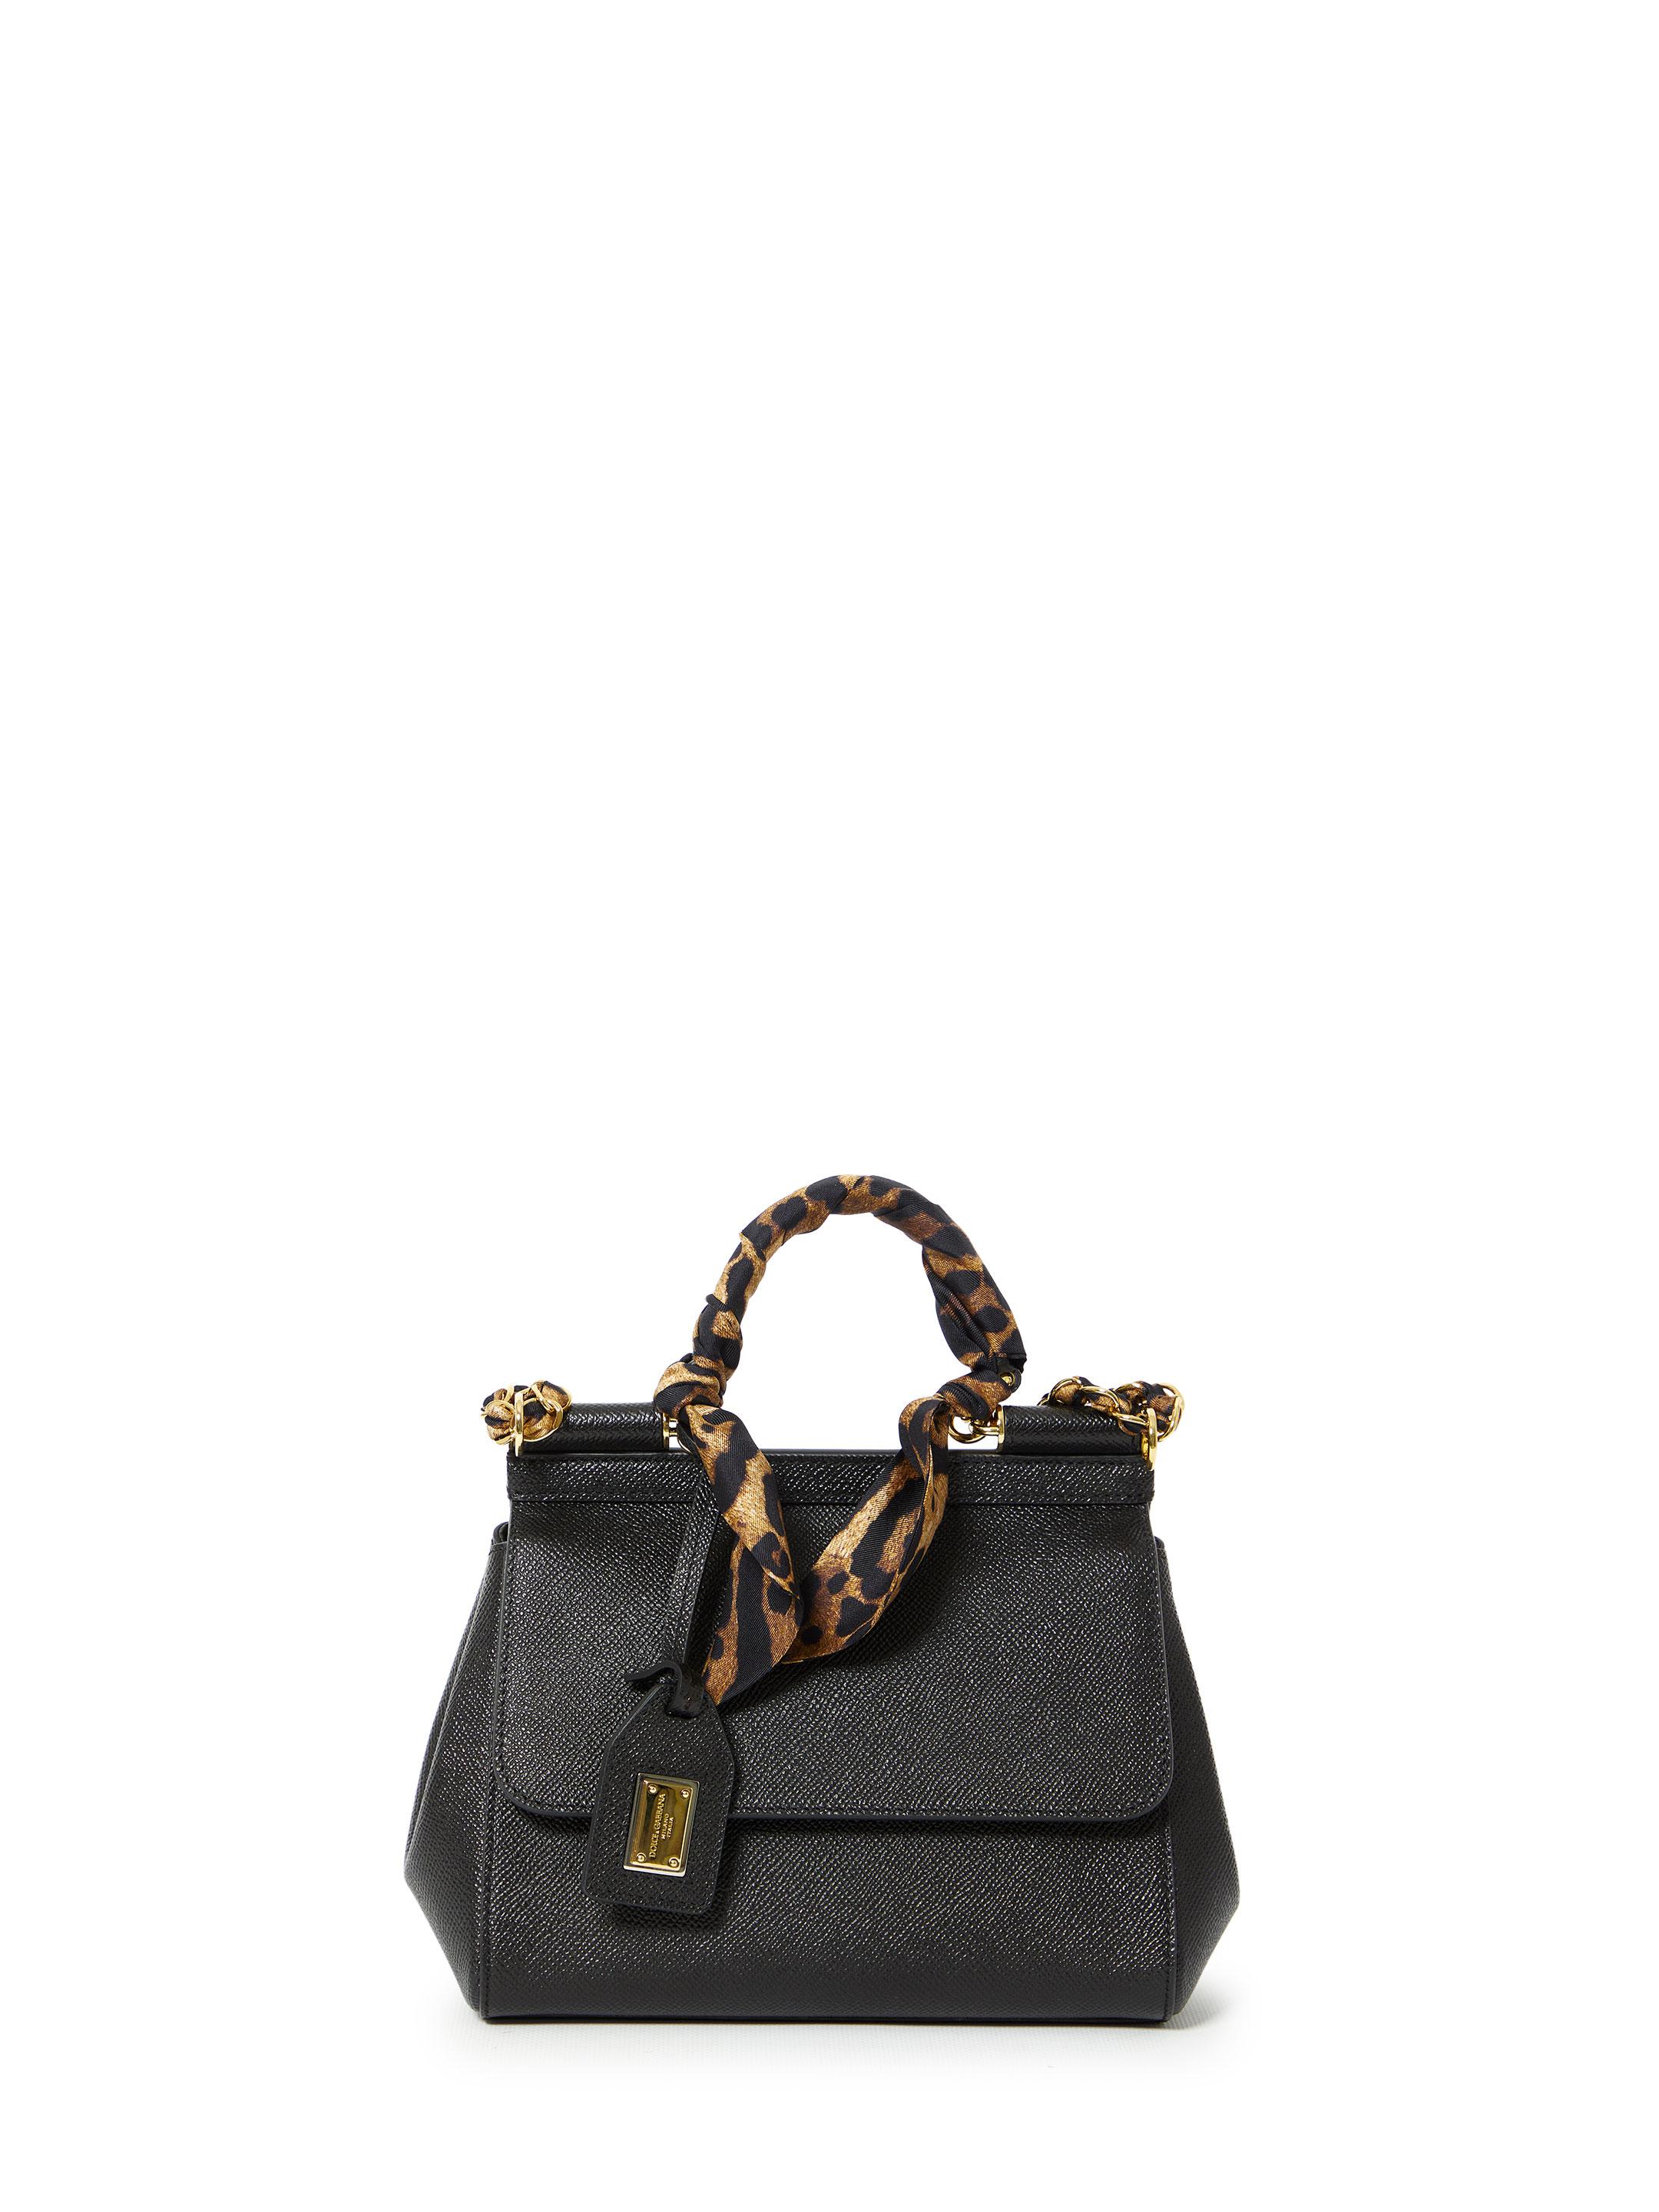 Dolce & Gabbana Small Sicily Bag With Scarf in Black